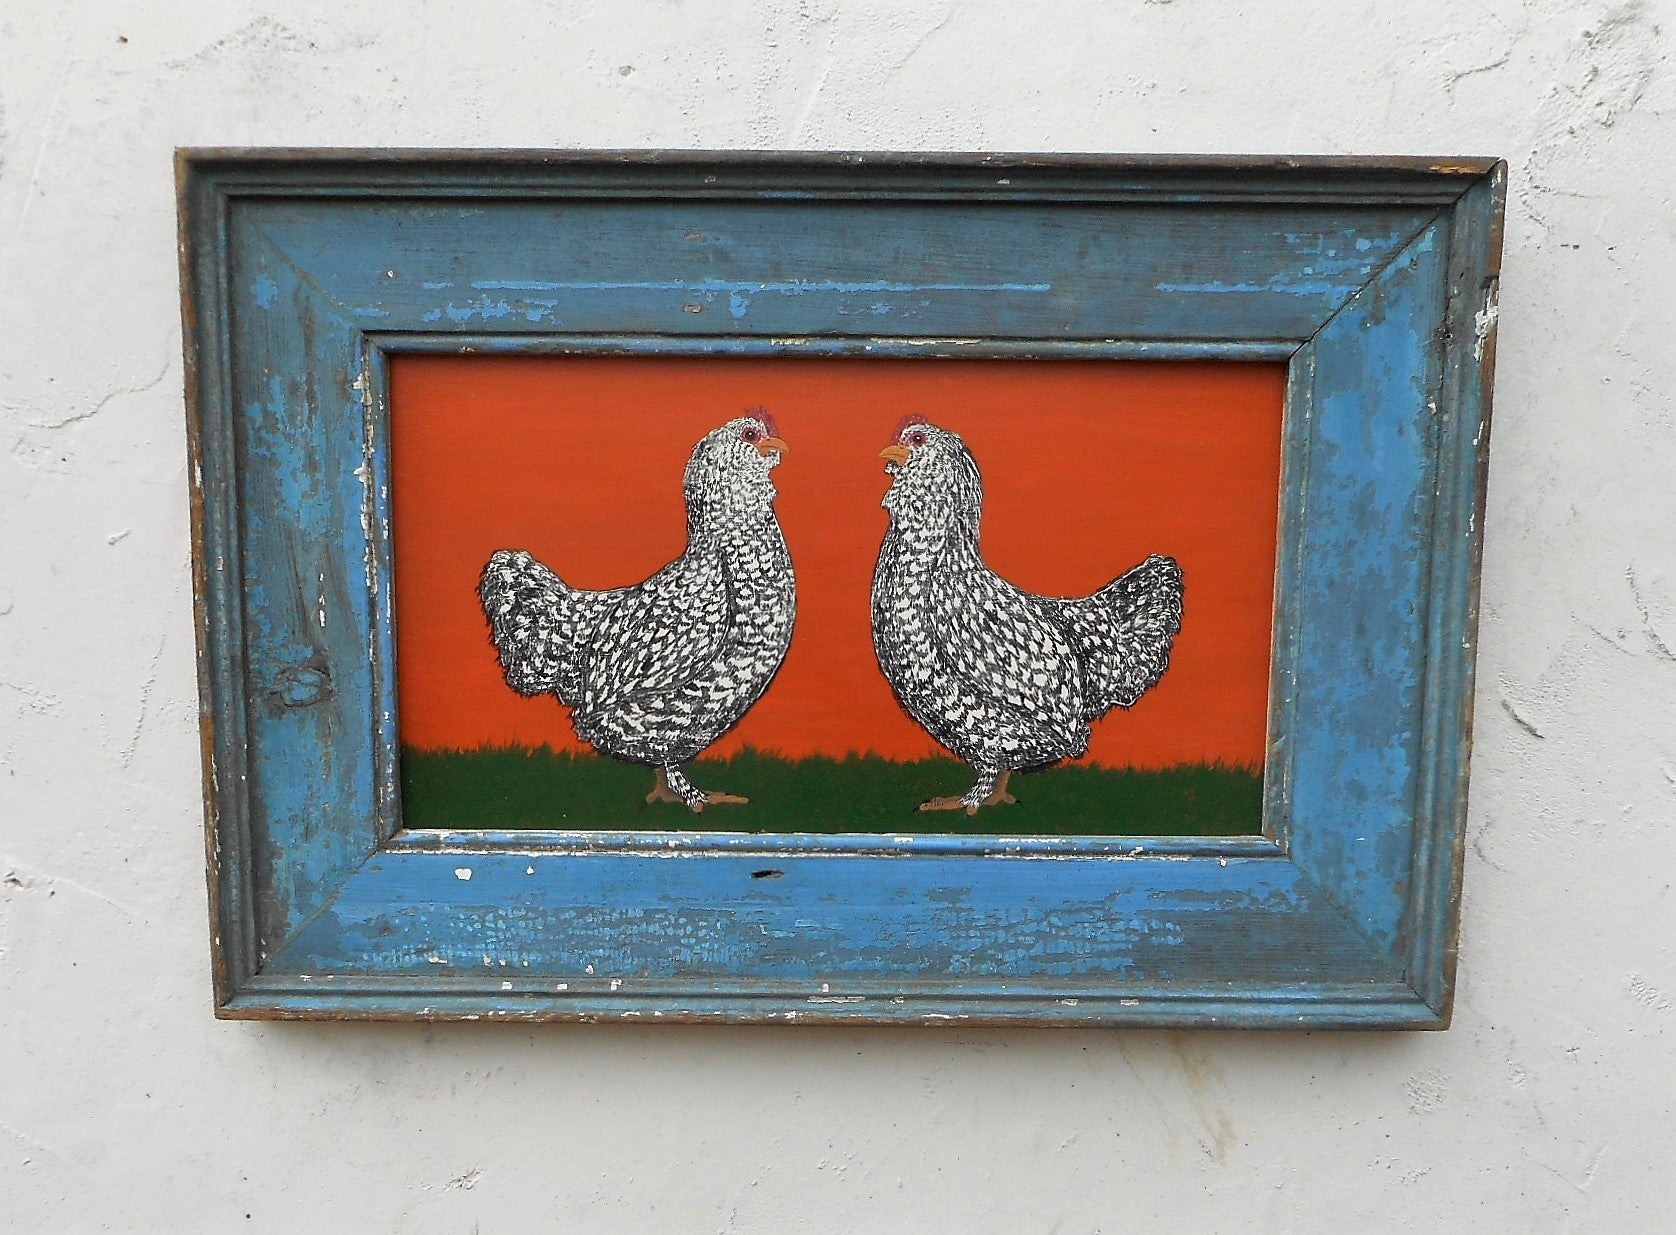 Two Hens painting